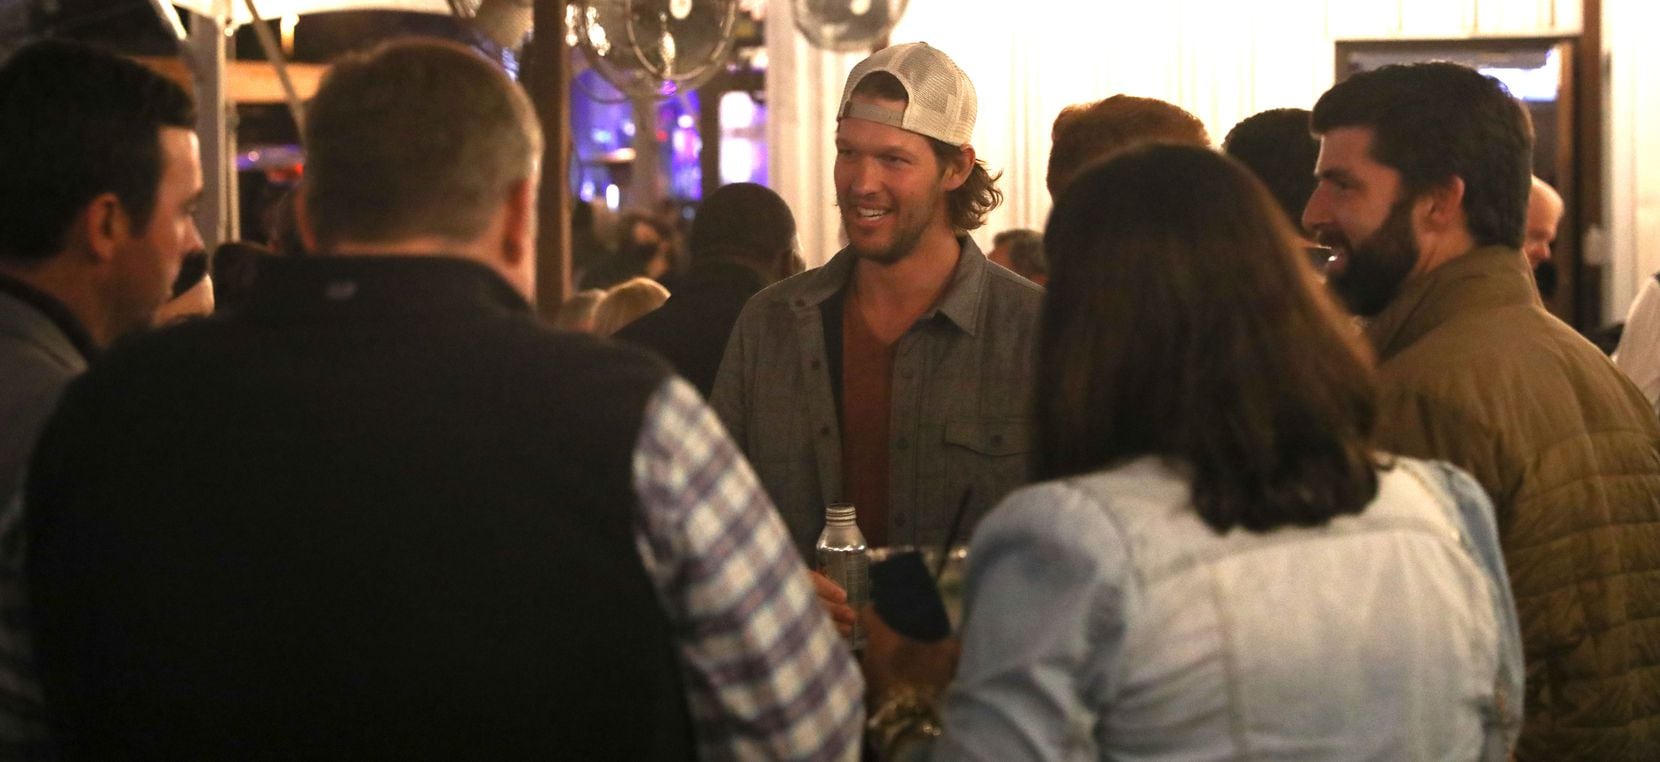 Clayton Kershaw speaks with guests at the November 11, 2021 fundraising event for nonprofit...